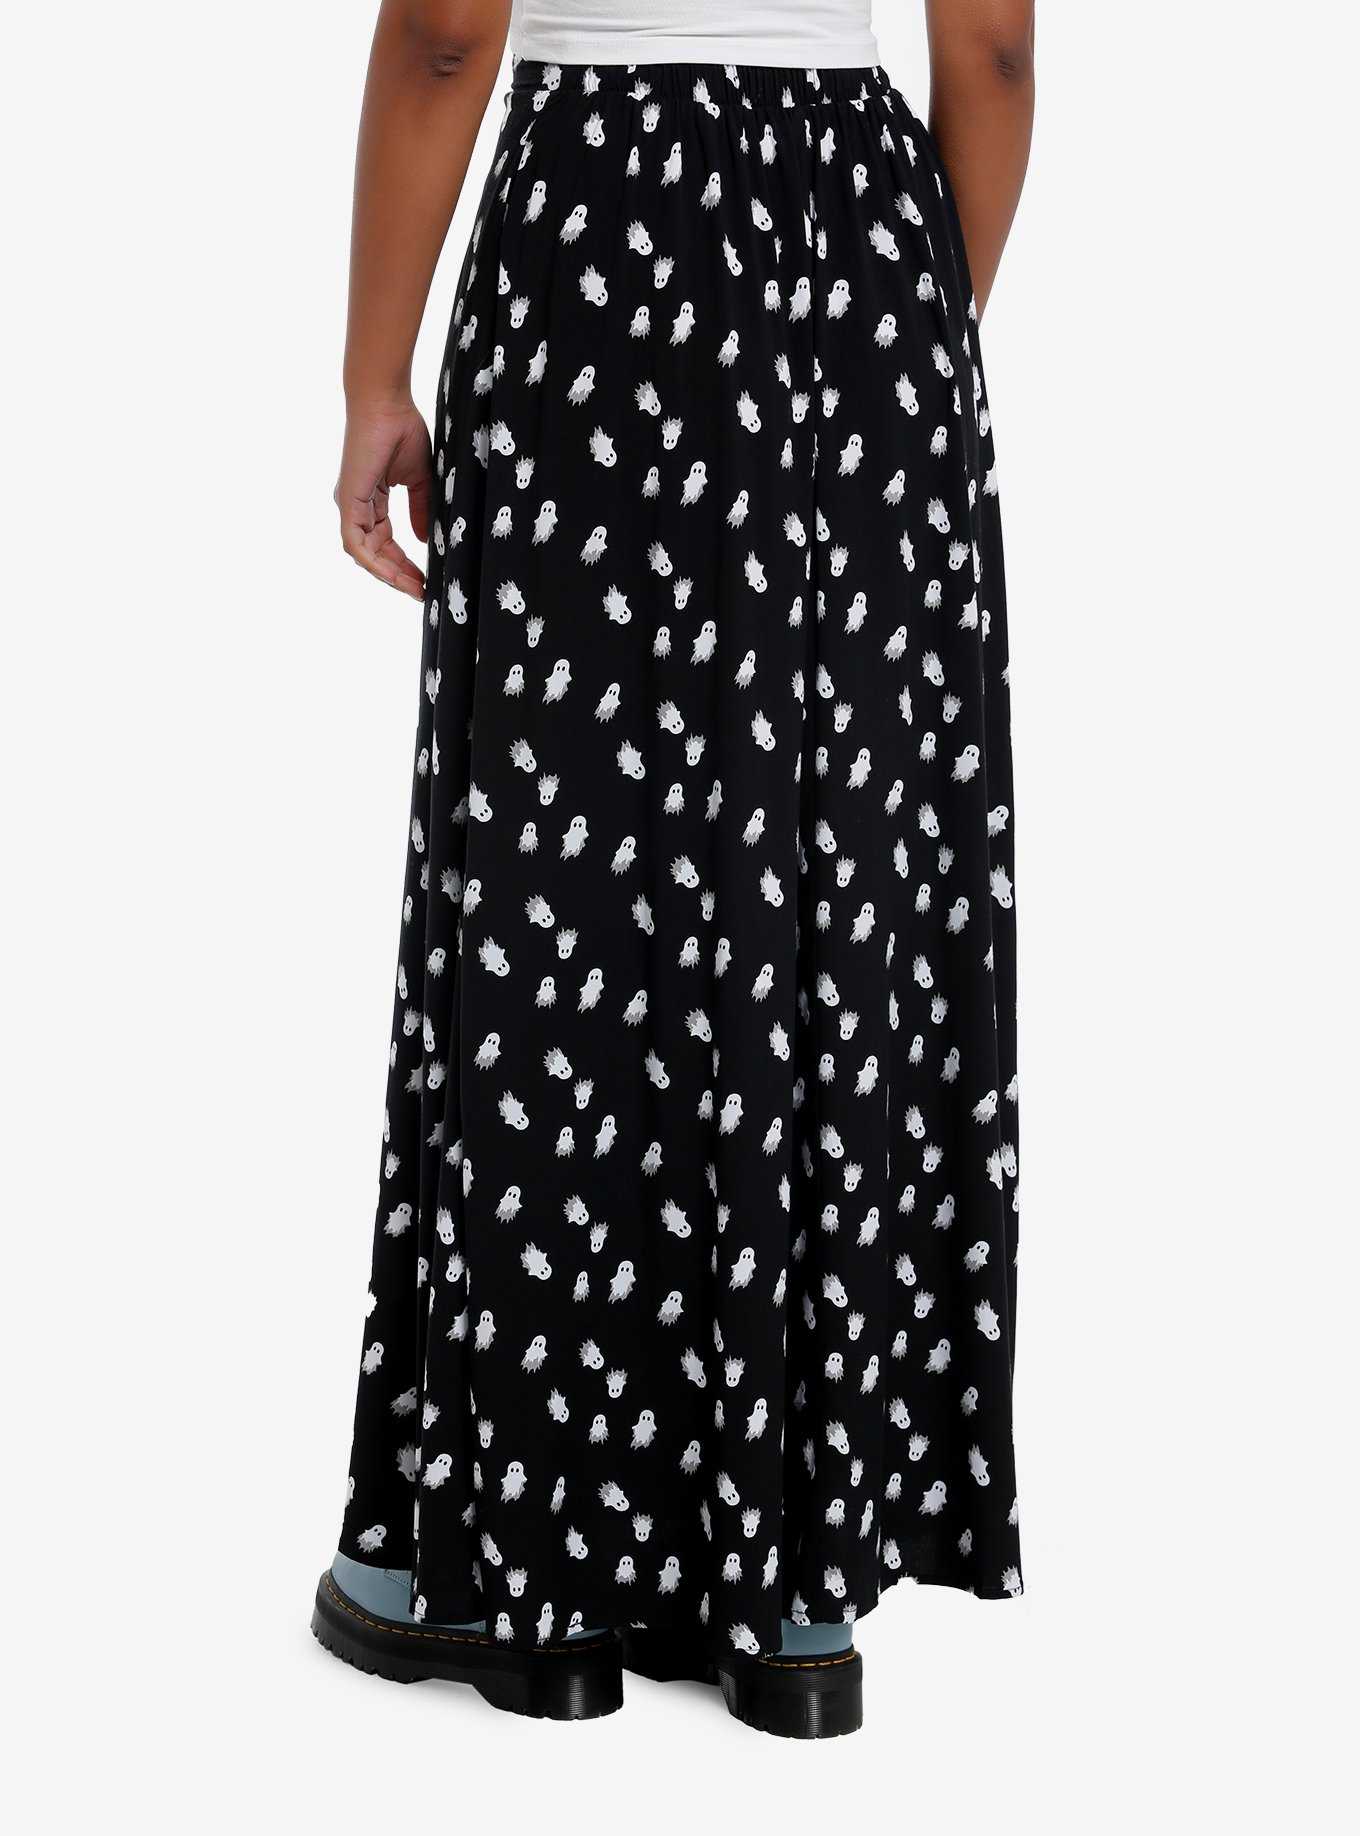 Thorn & Fable Black & White Ghost Maxi Skirt, , hi-res